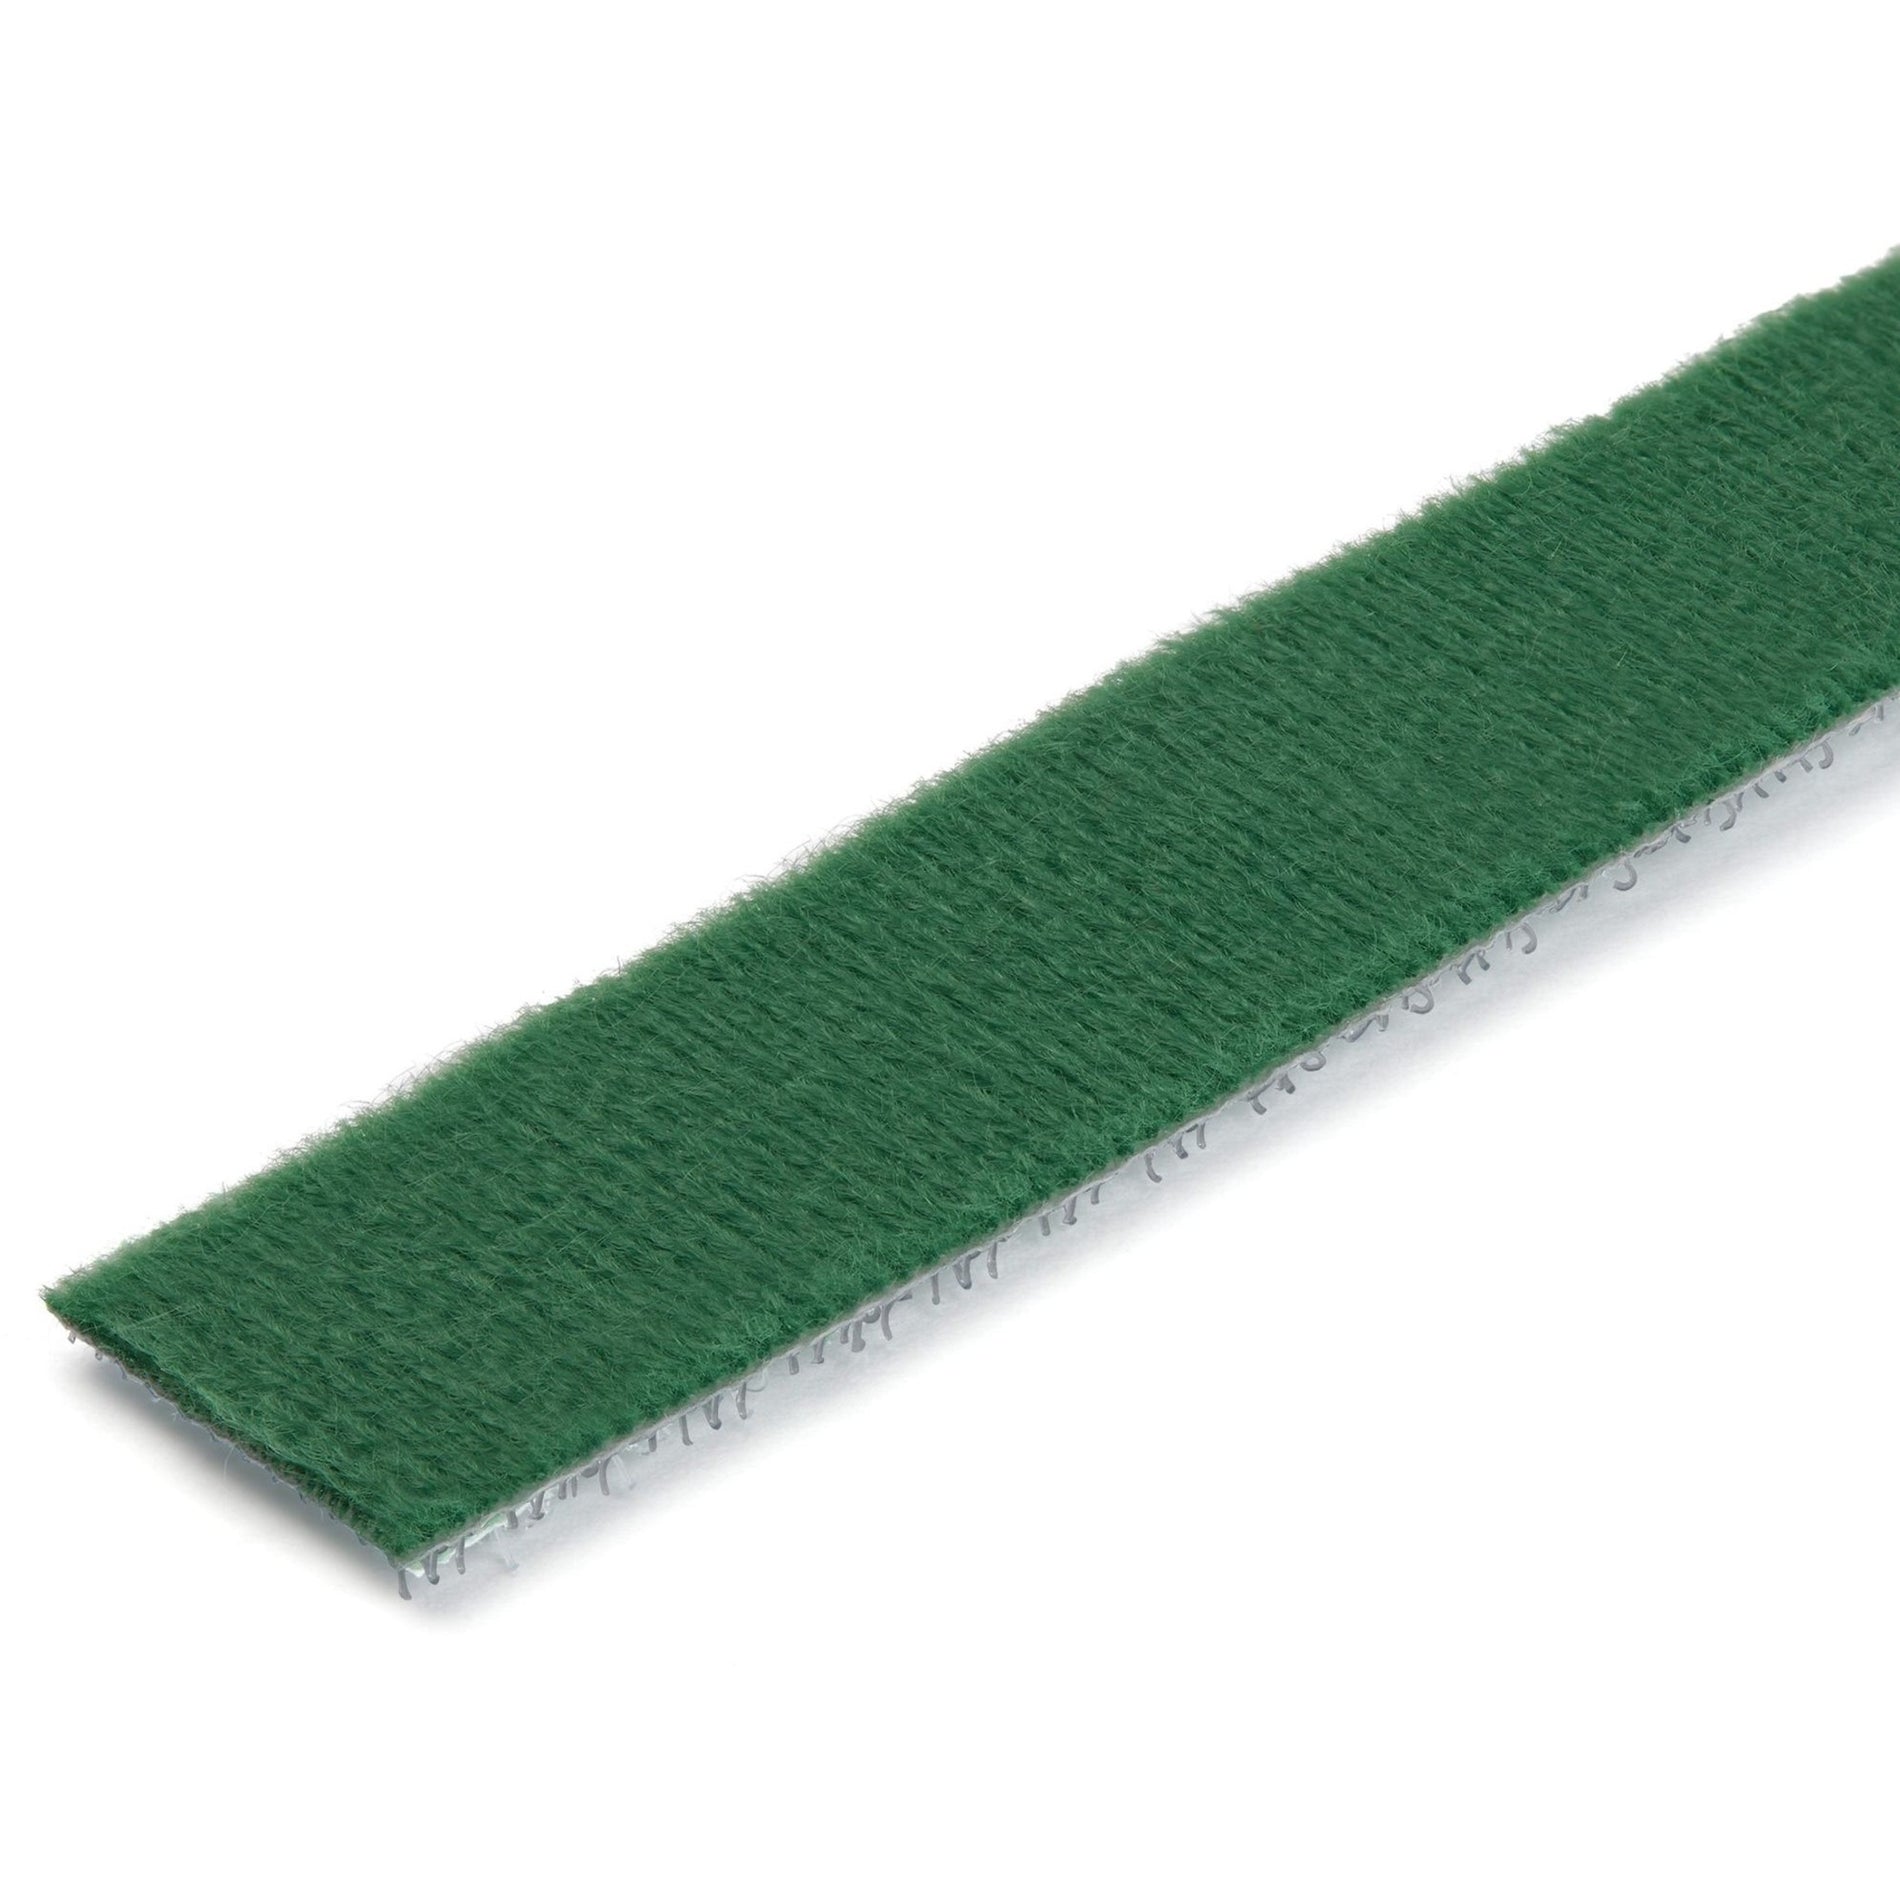 StarTech.com HKLP25GN 25ft. Hook and Loop Roll - Green, Cable Management